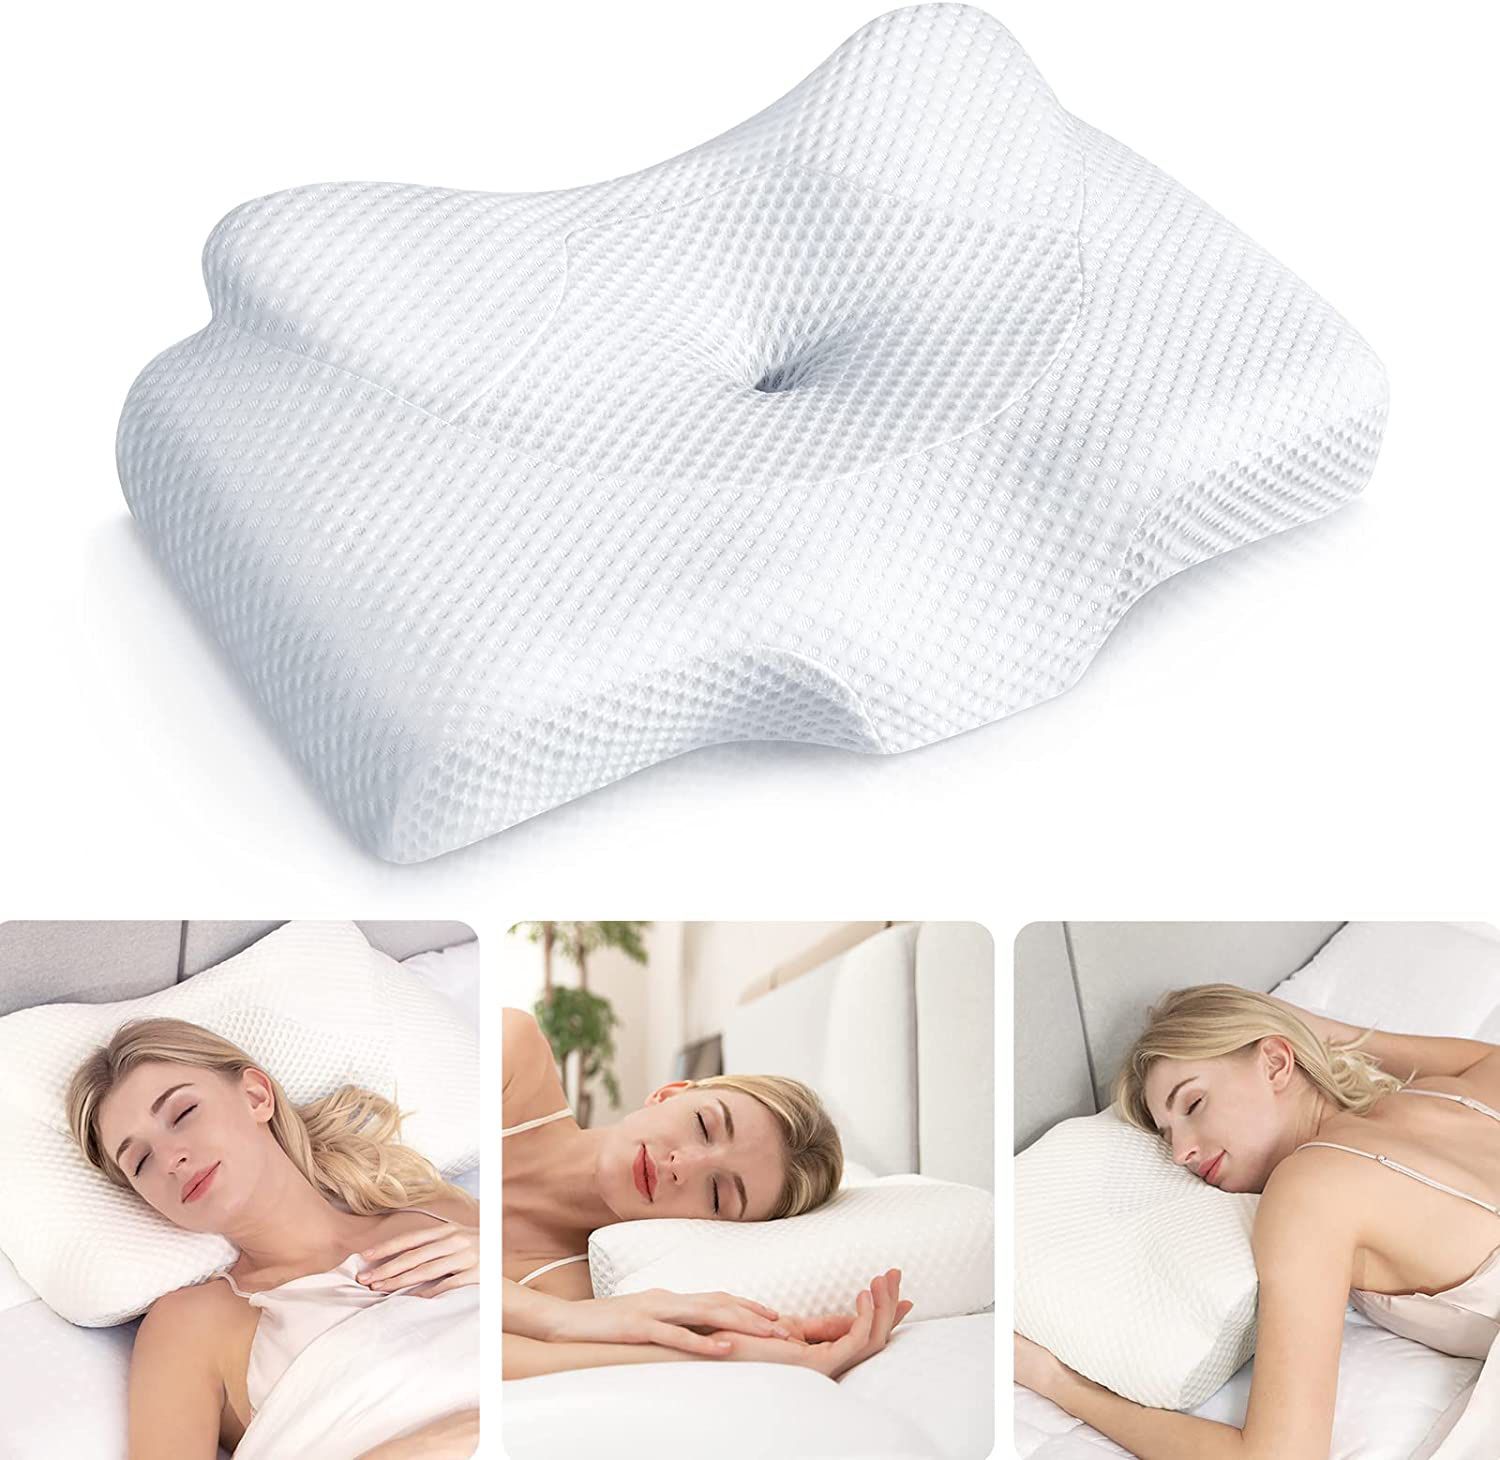 Cervical Pillow for Neck Pain Relief, Hollow Design Odorless Memory Foam Pillows with Cooling Case, Adjustable Orthopedic Bed Pillow for Sleeping, Con